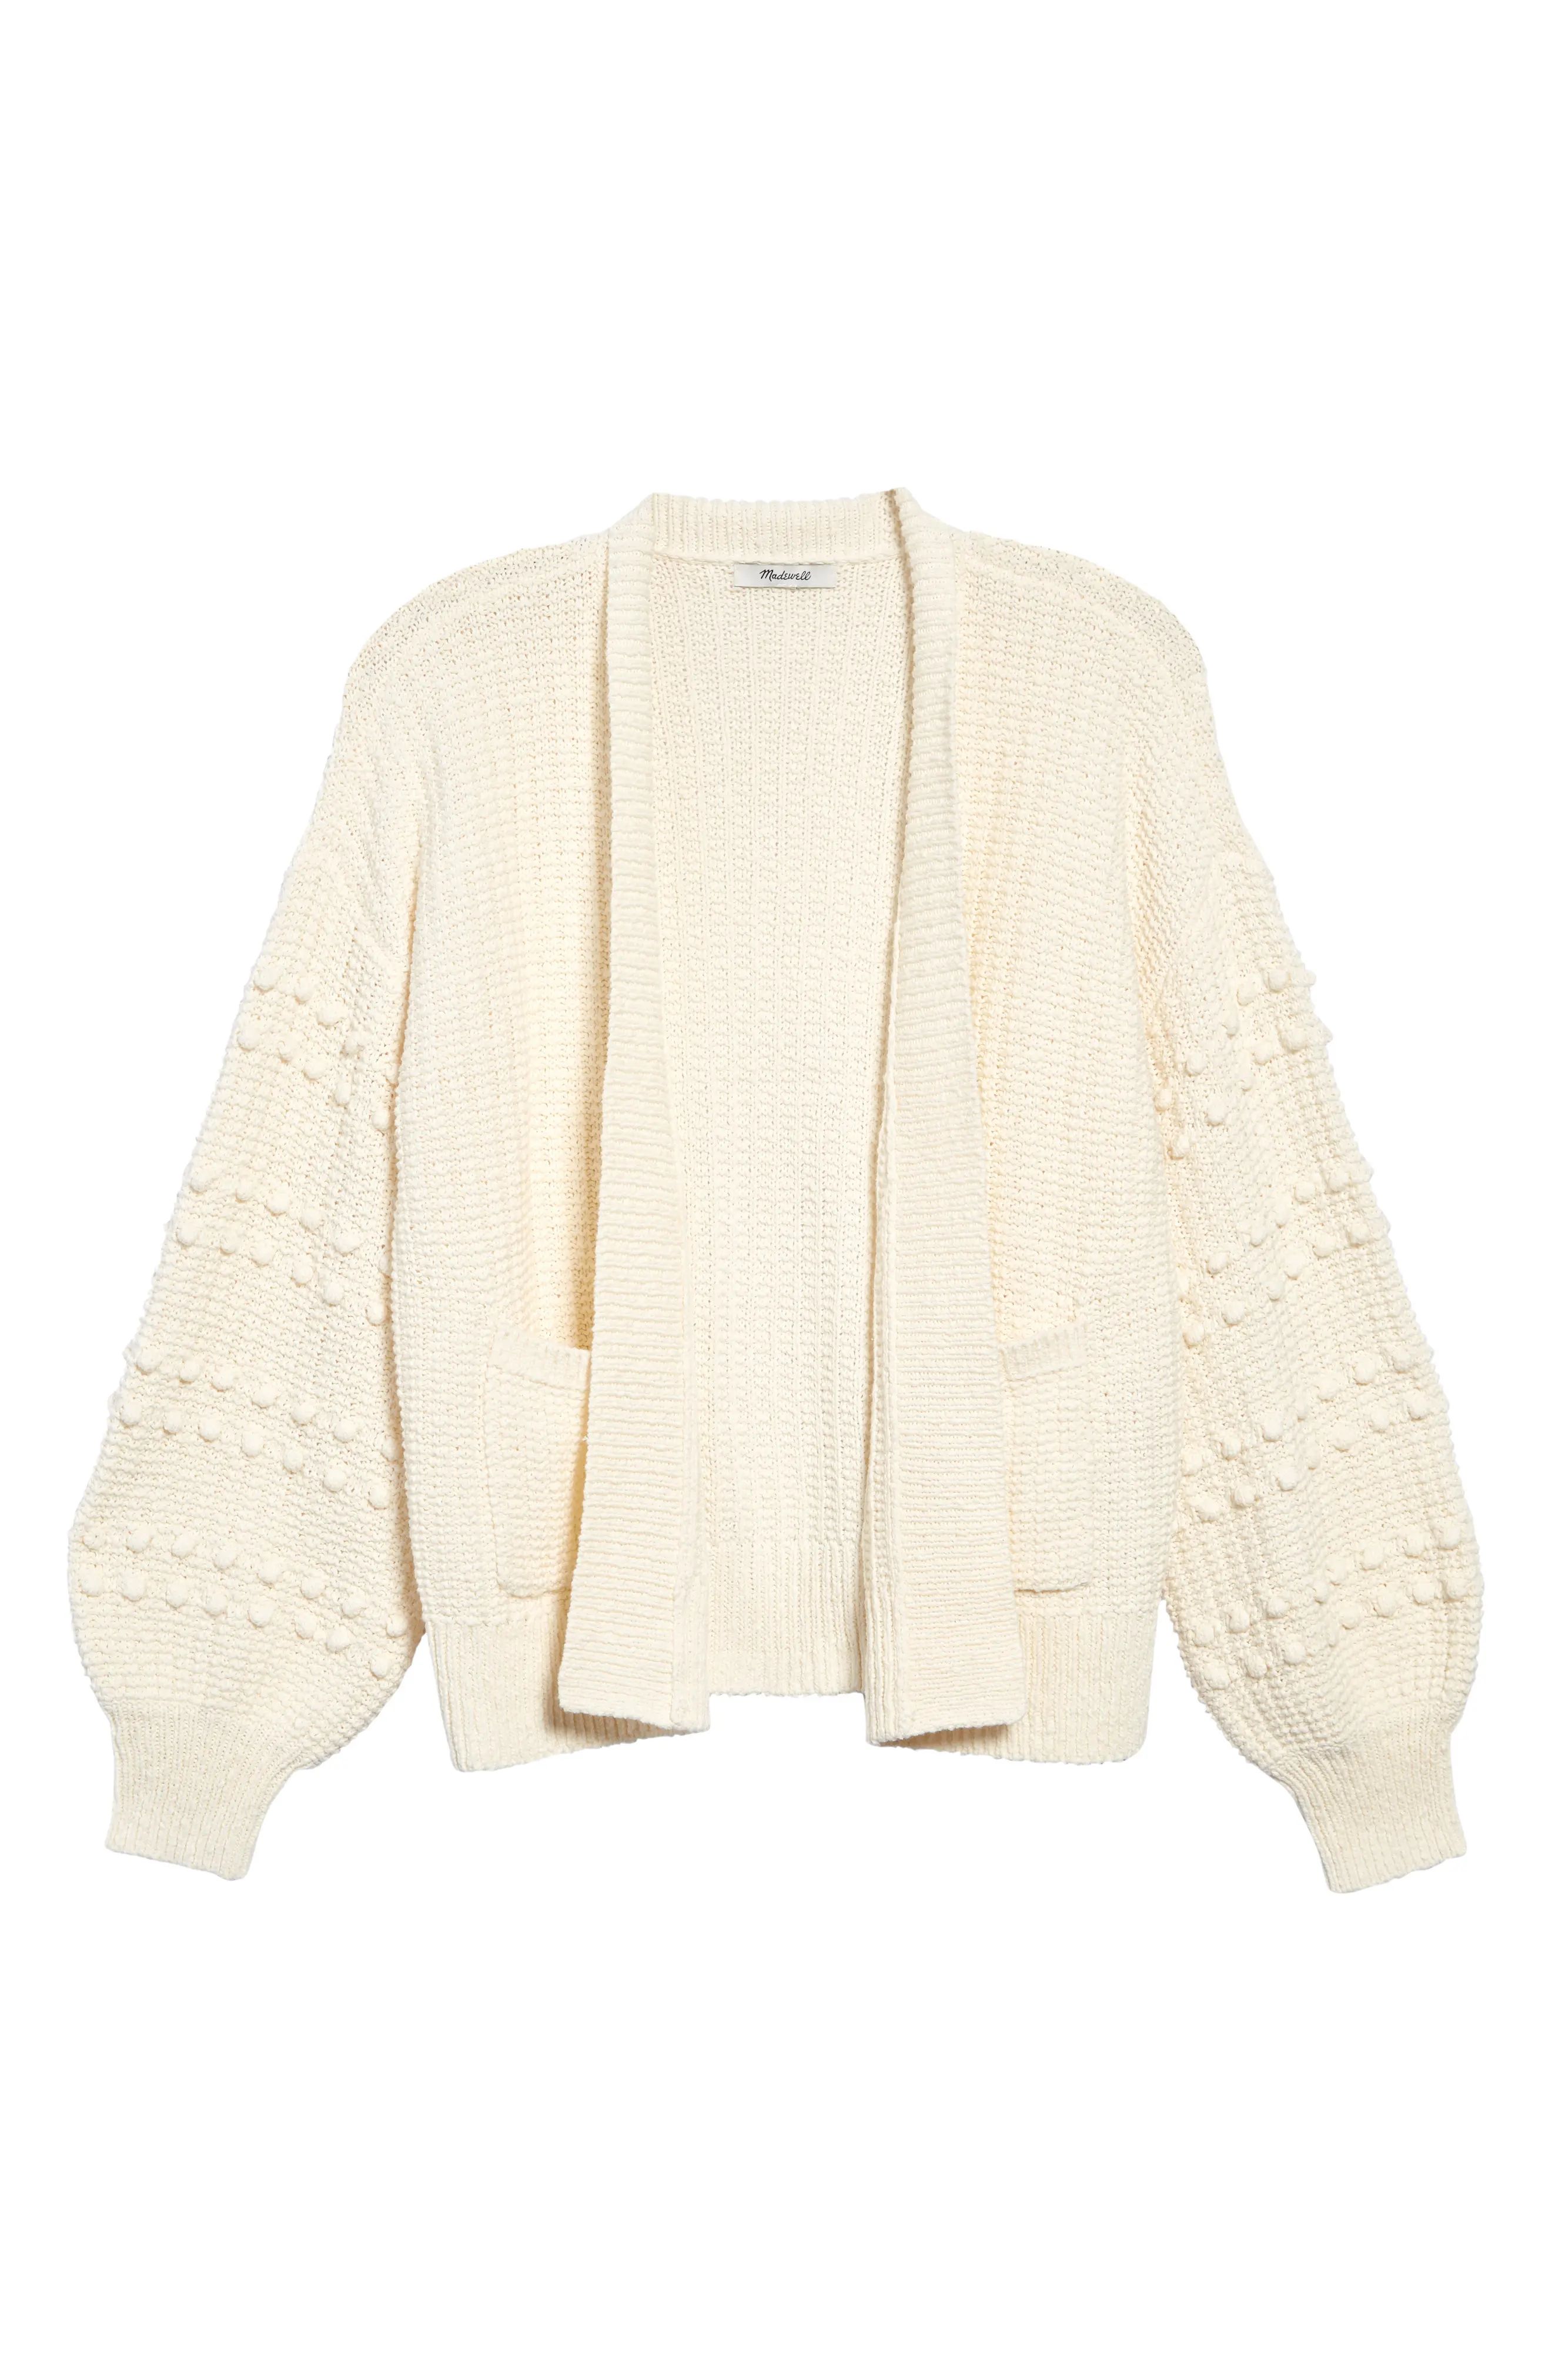 Women's Madewell Bobble Cardigan Sweater, Size X-Large - Ivory | Nordstrom